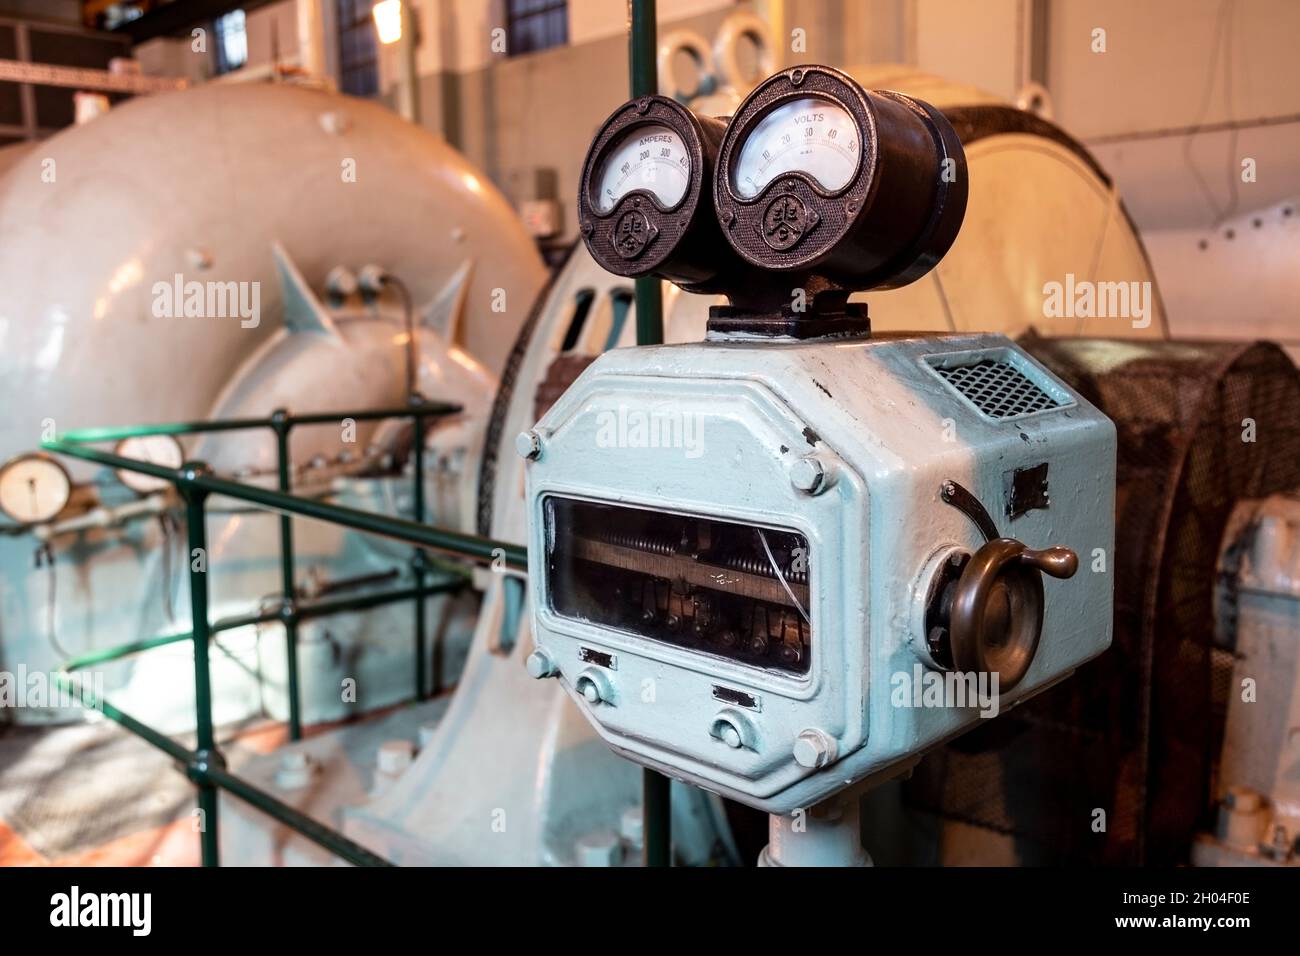 Meters showing the electrical feed to the pump motors at West India Dock Impounding Station, Canary Wharf, London, UK Stock Photo